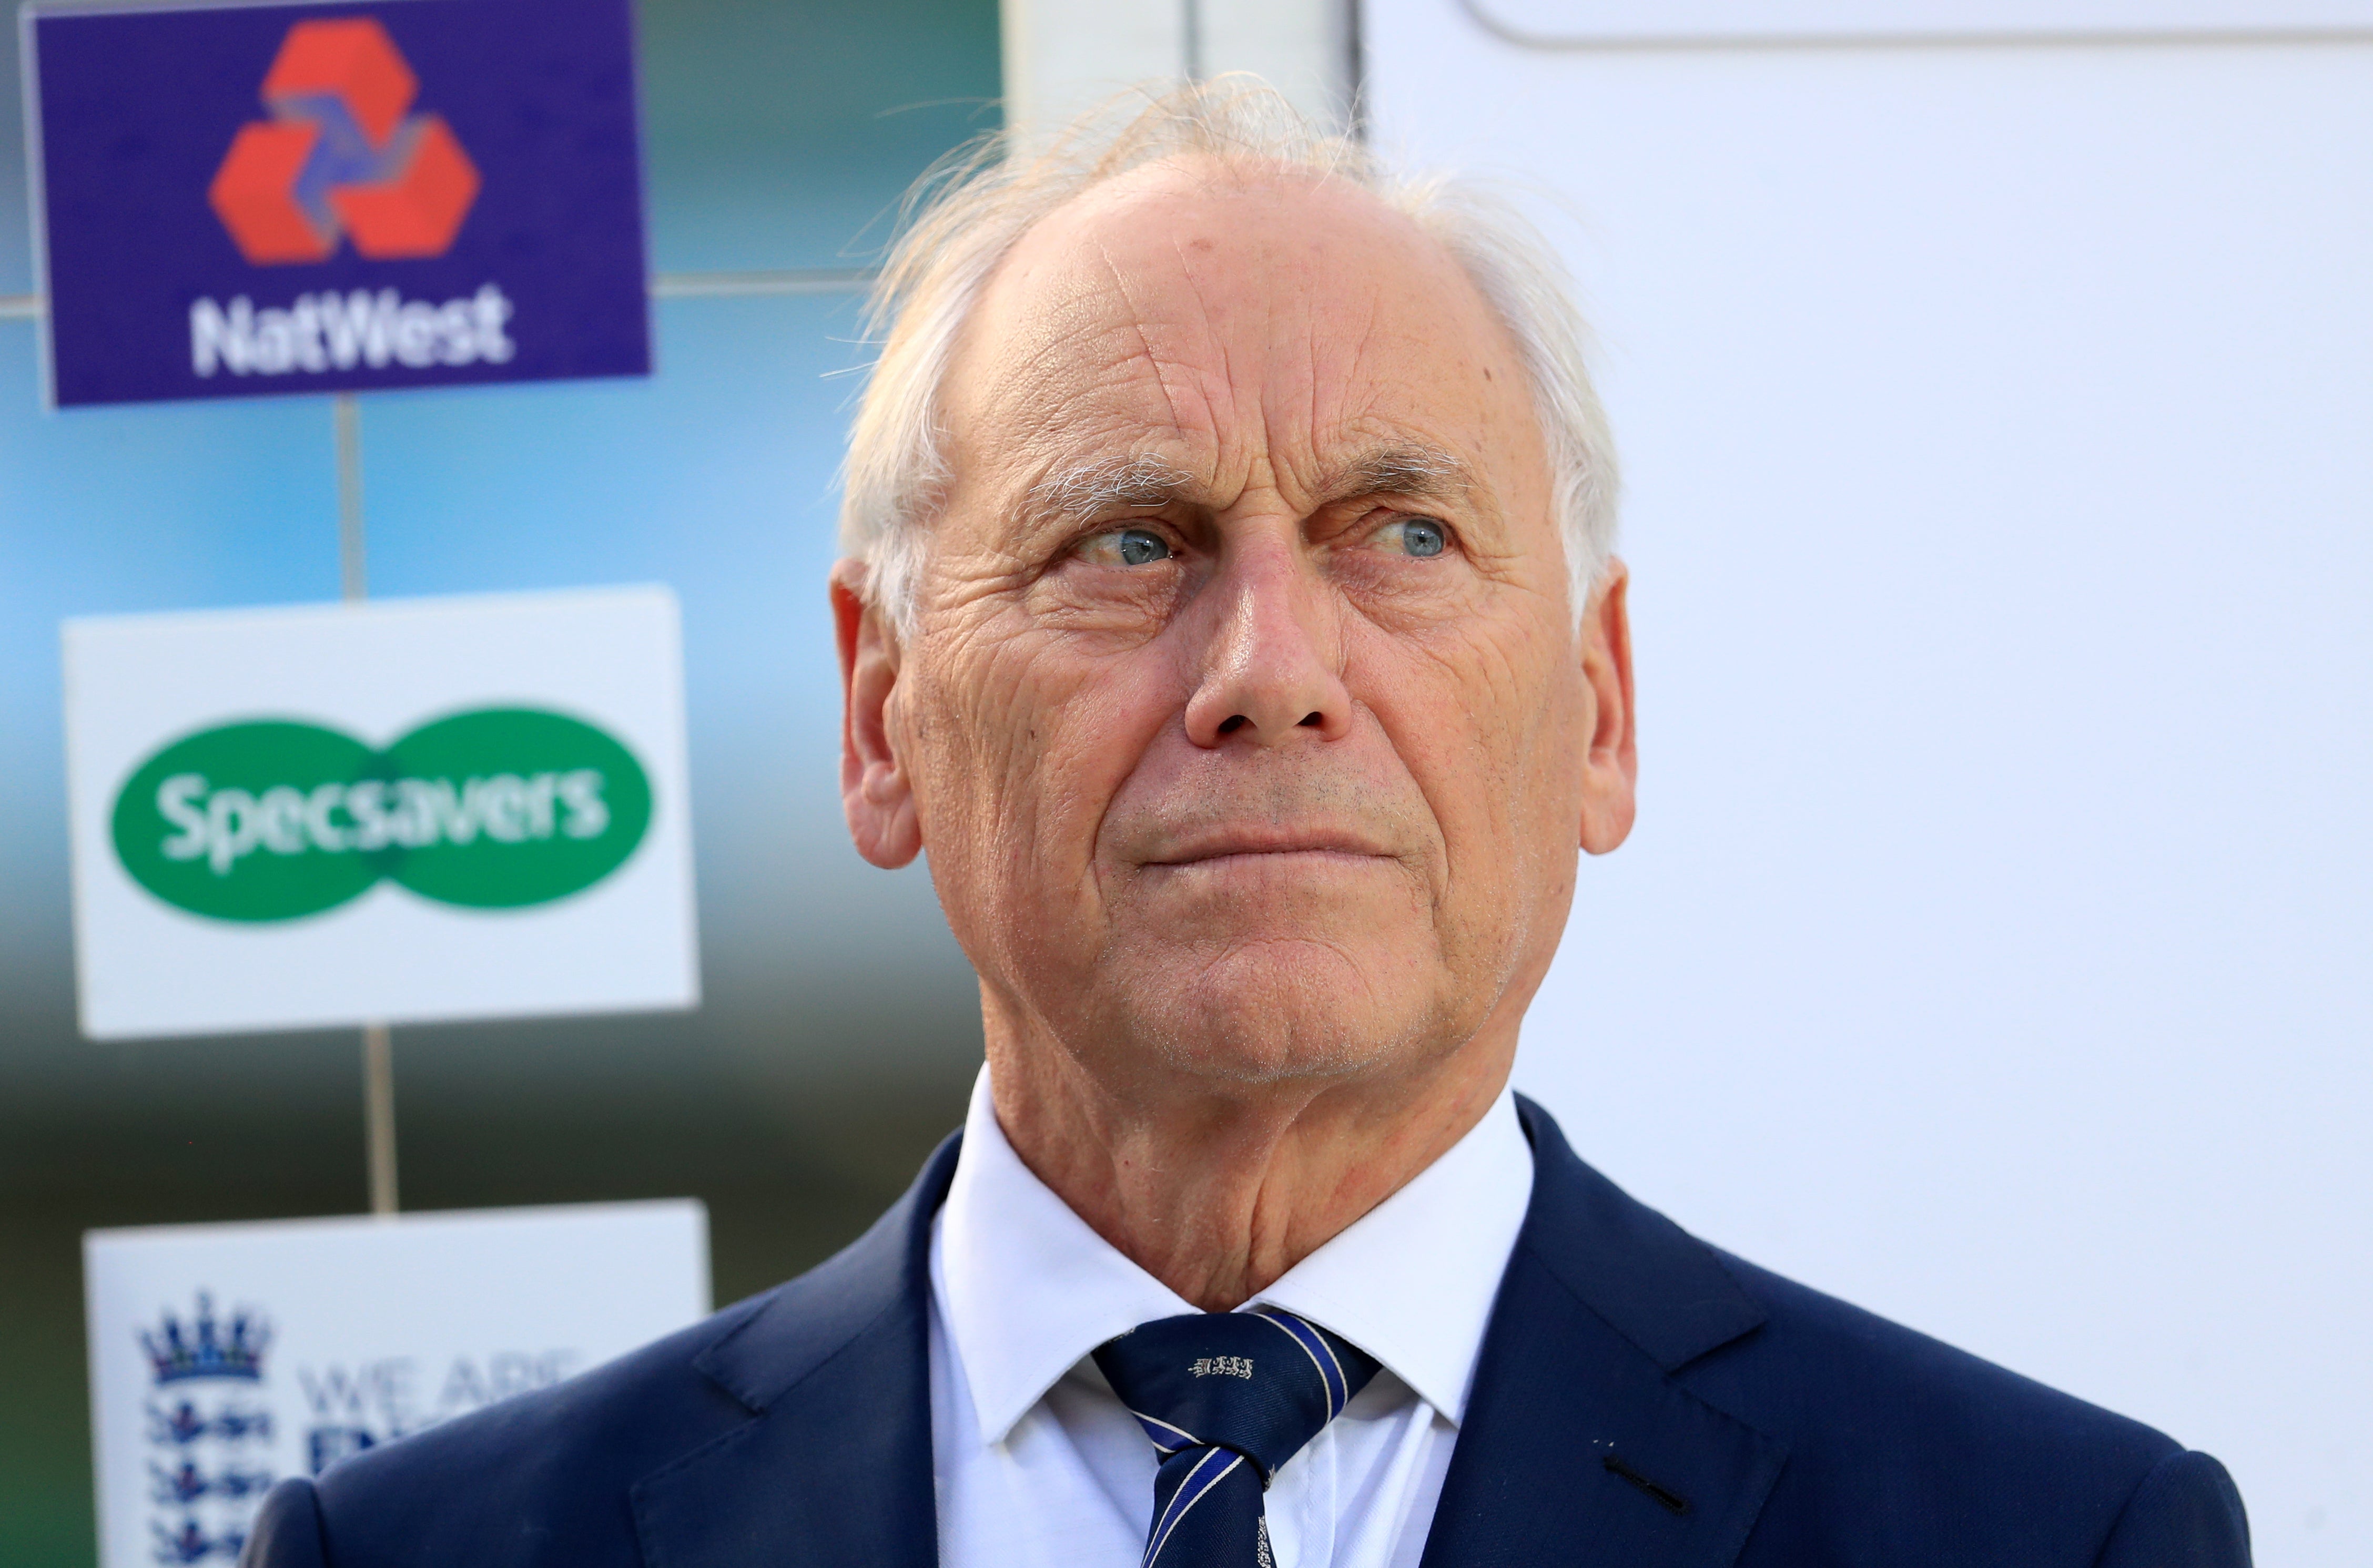 Former Yorkshire chairman Colin Graves has vowed to support reforms at the club (Mike Egerton/PA)